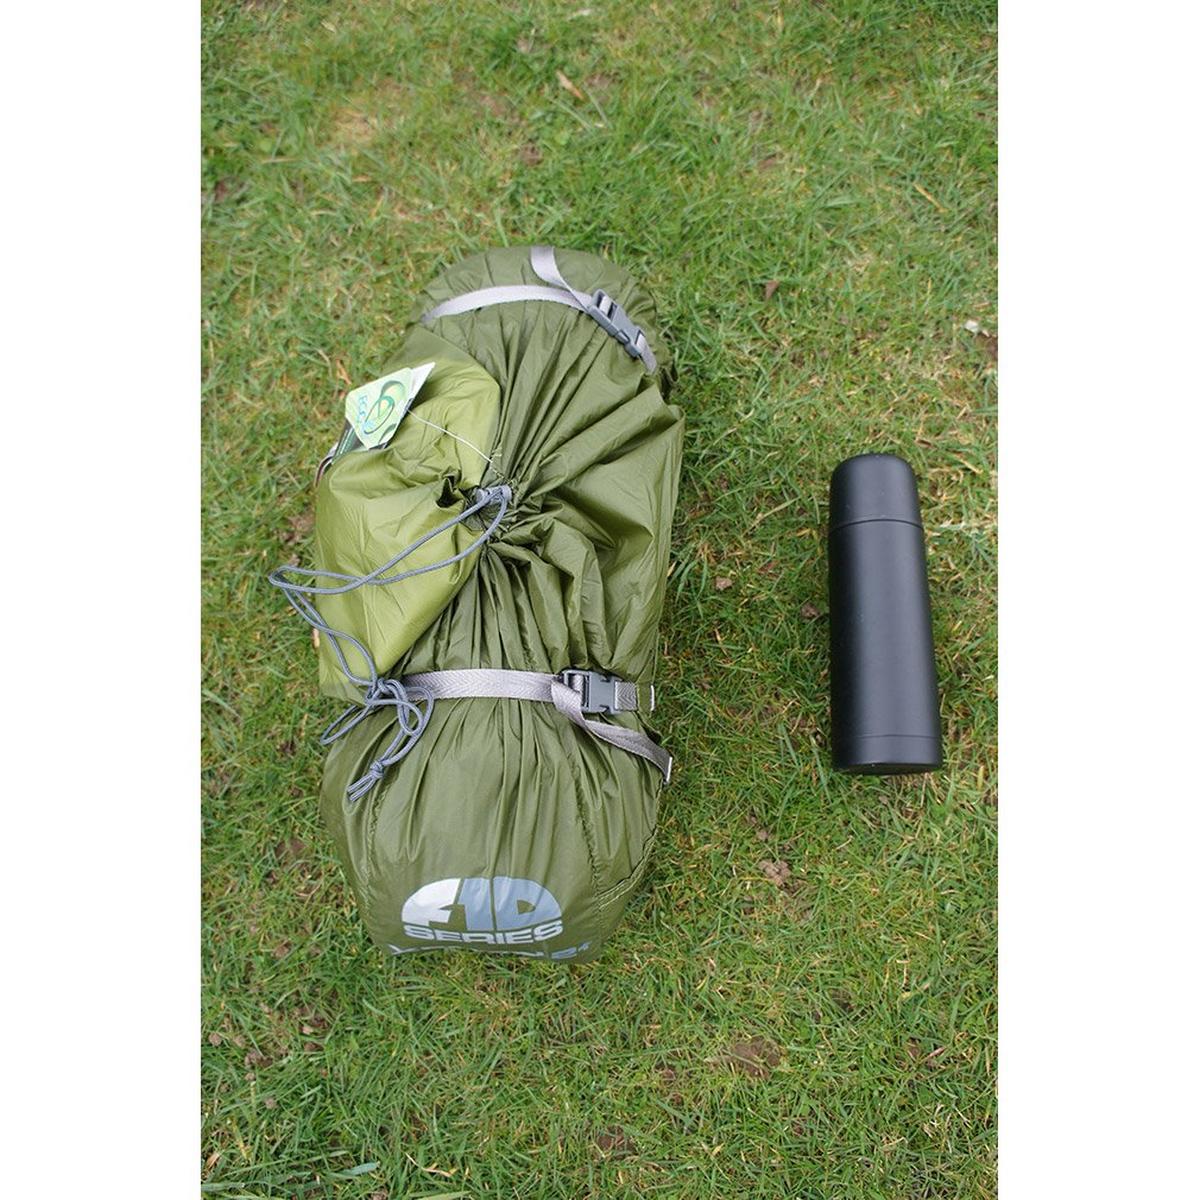 Force Ten Xenon UL 2+ | Two Person Tent